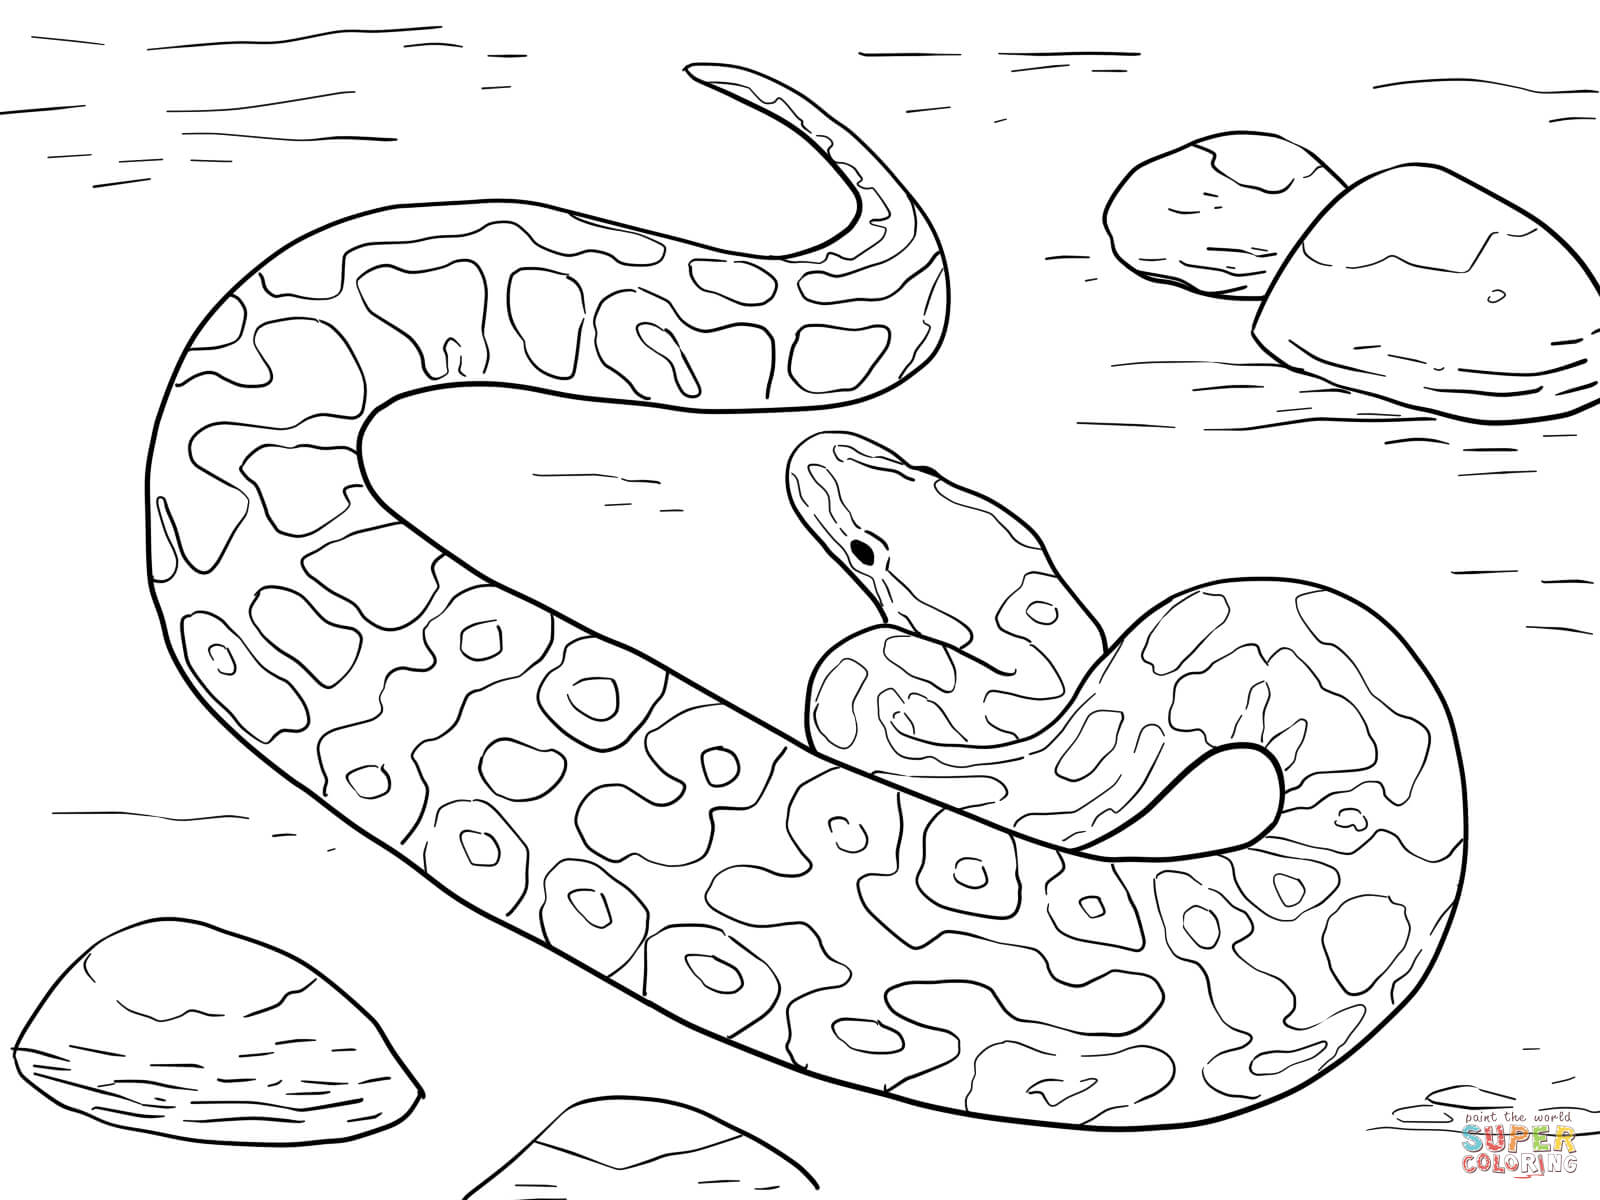 Boa Constrictor coloring #14, Download drawings